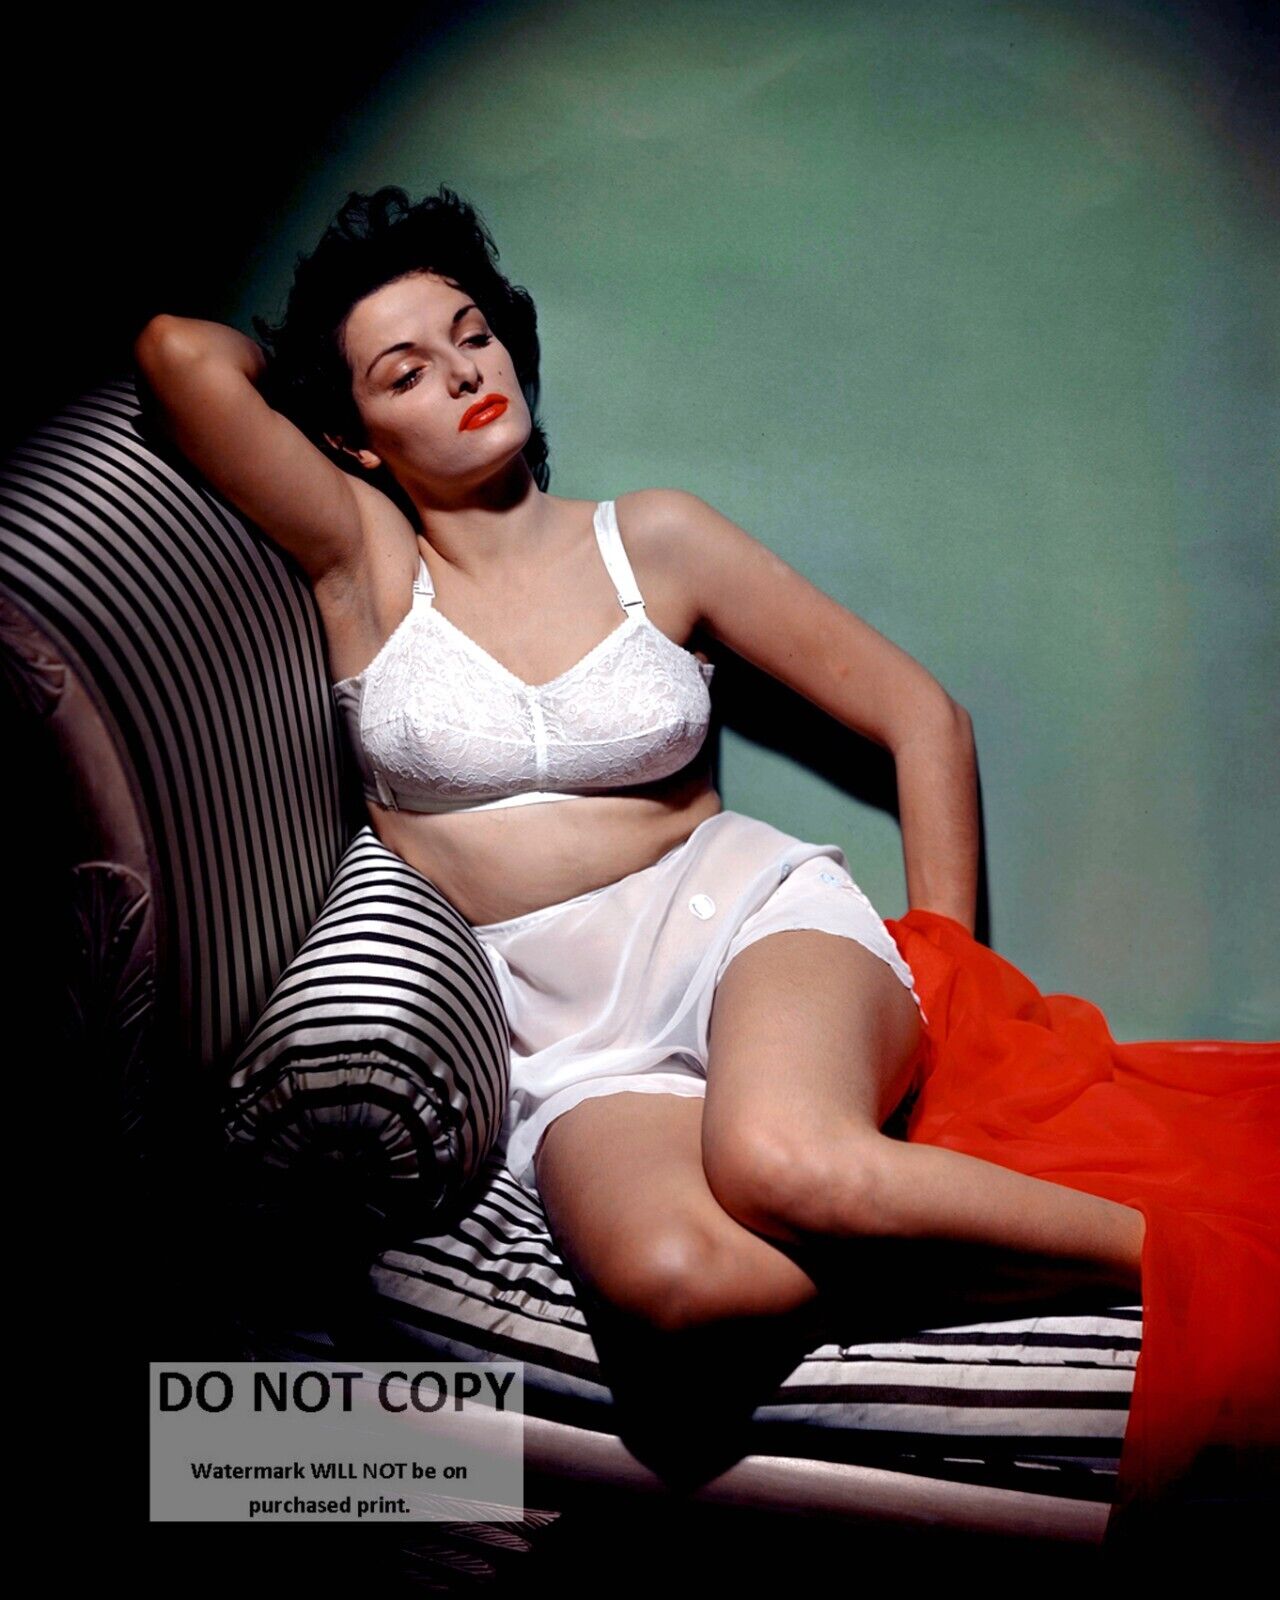 JANE RUSSELL ACTRESS AND SEX-SYMBOL PIN UP - 8X10 PUBLICITY PHOTO (OP-577)